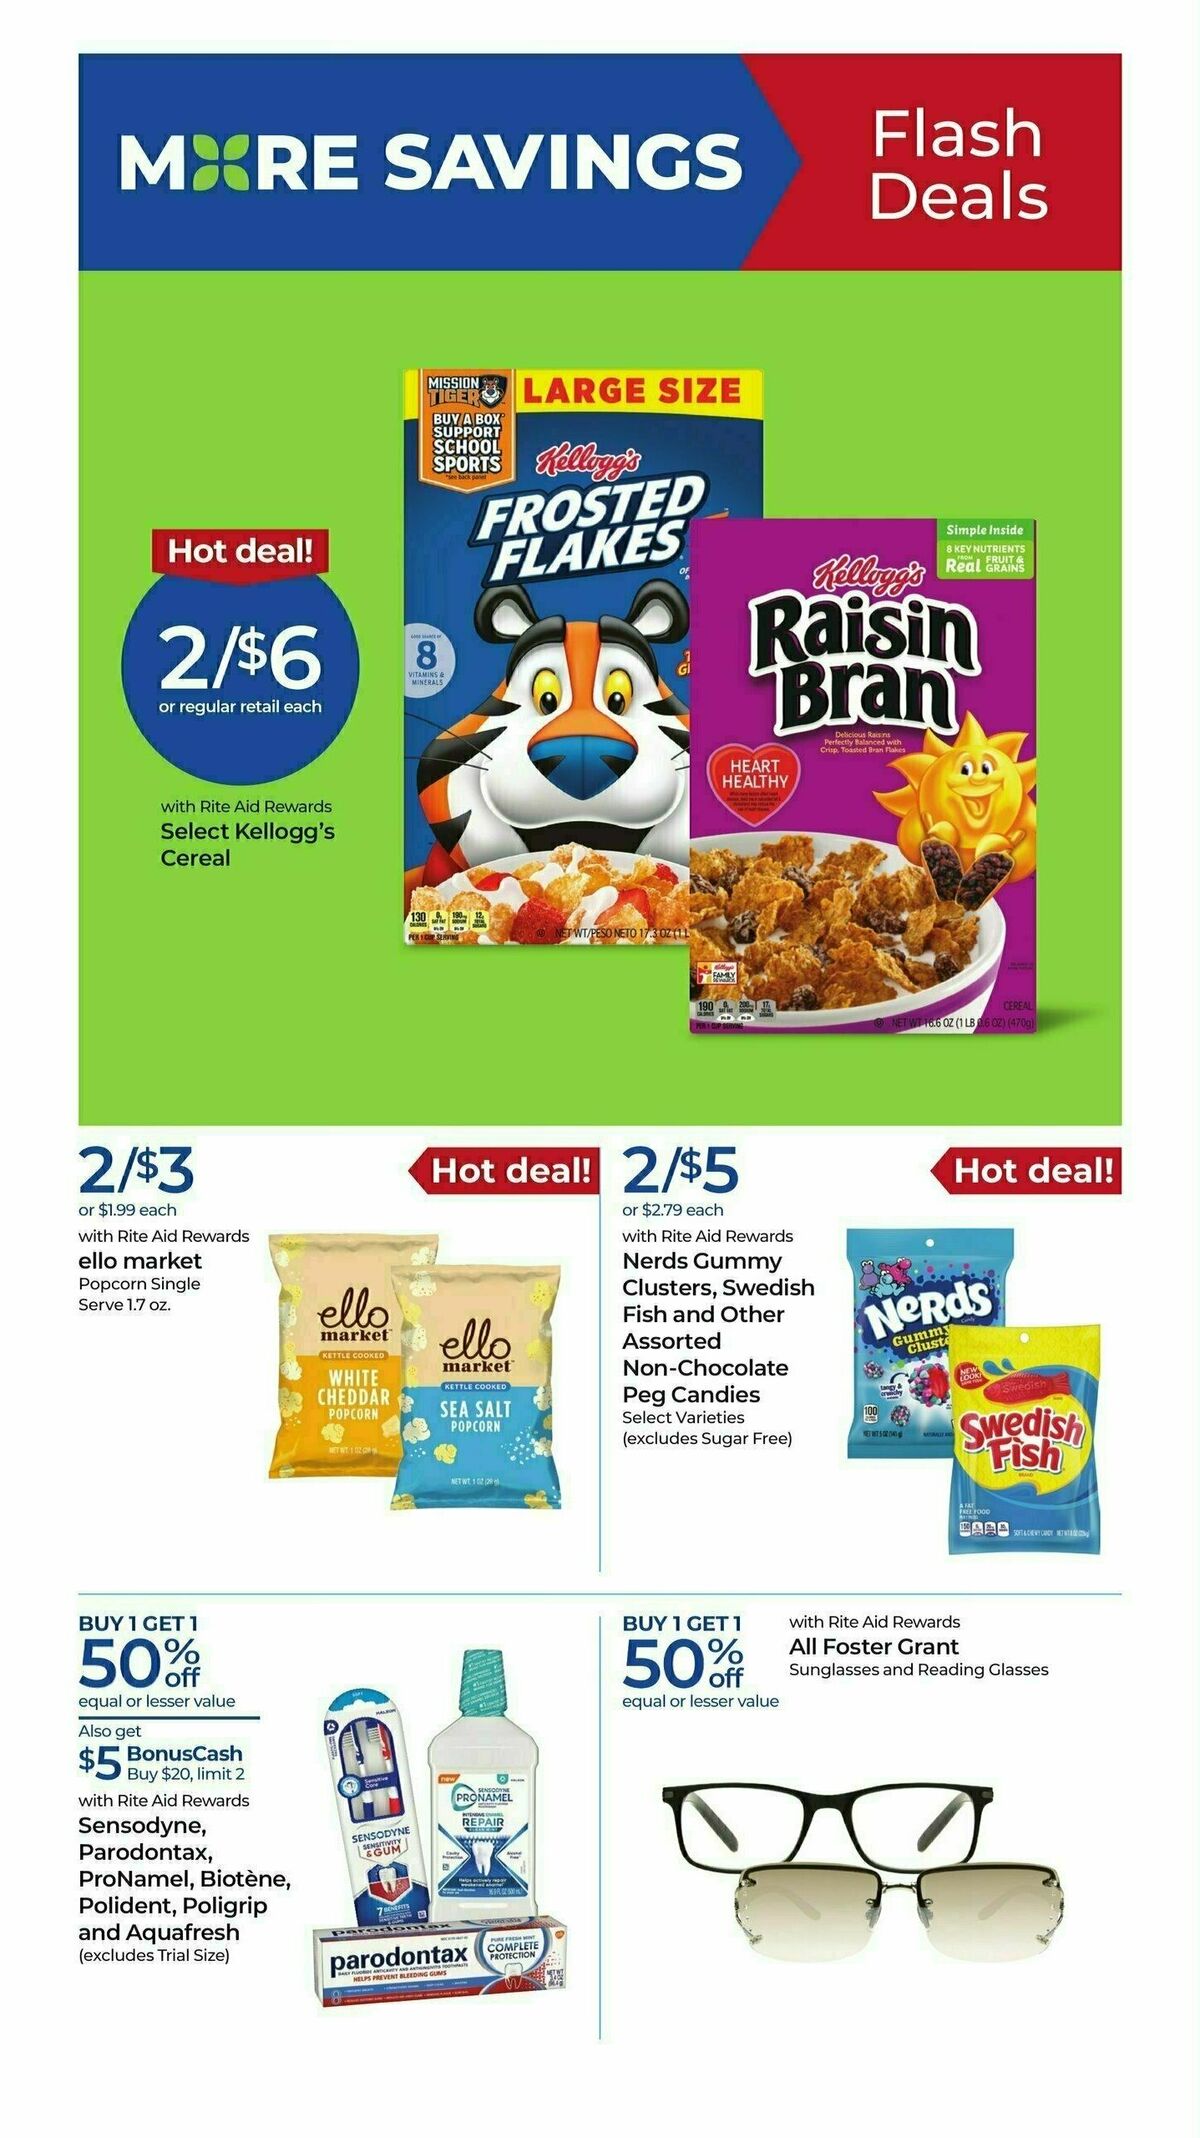 Rite Aid Weekly Ad from June 30